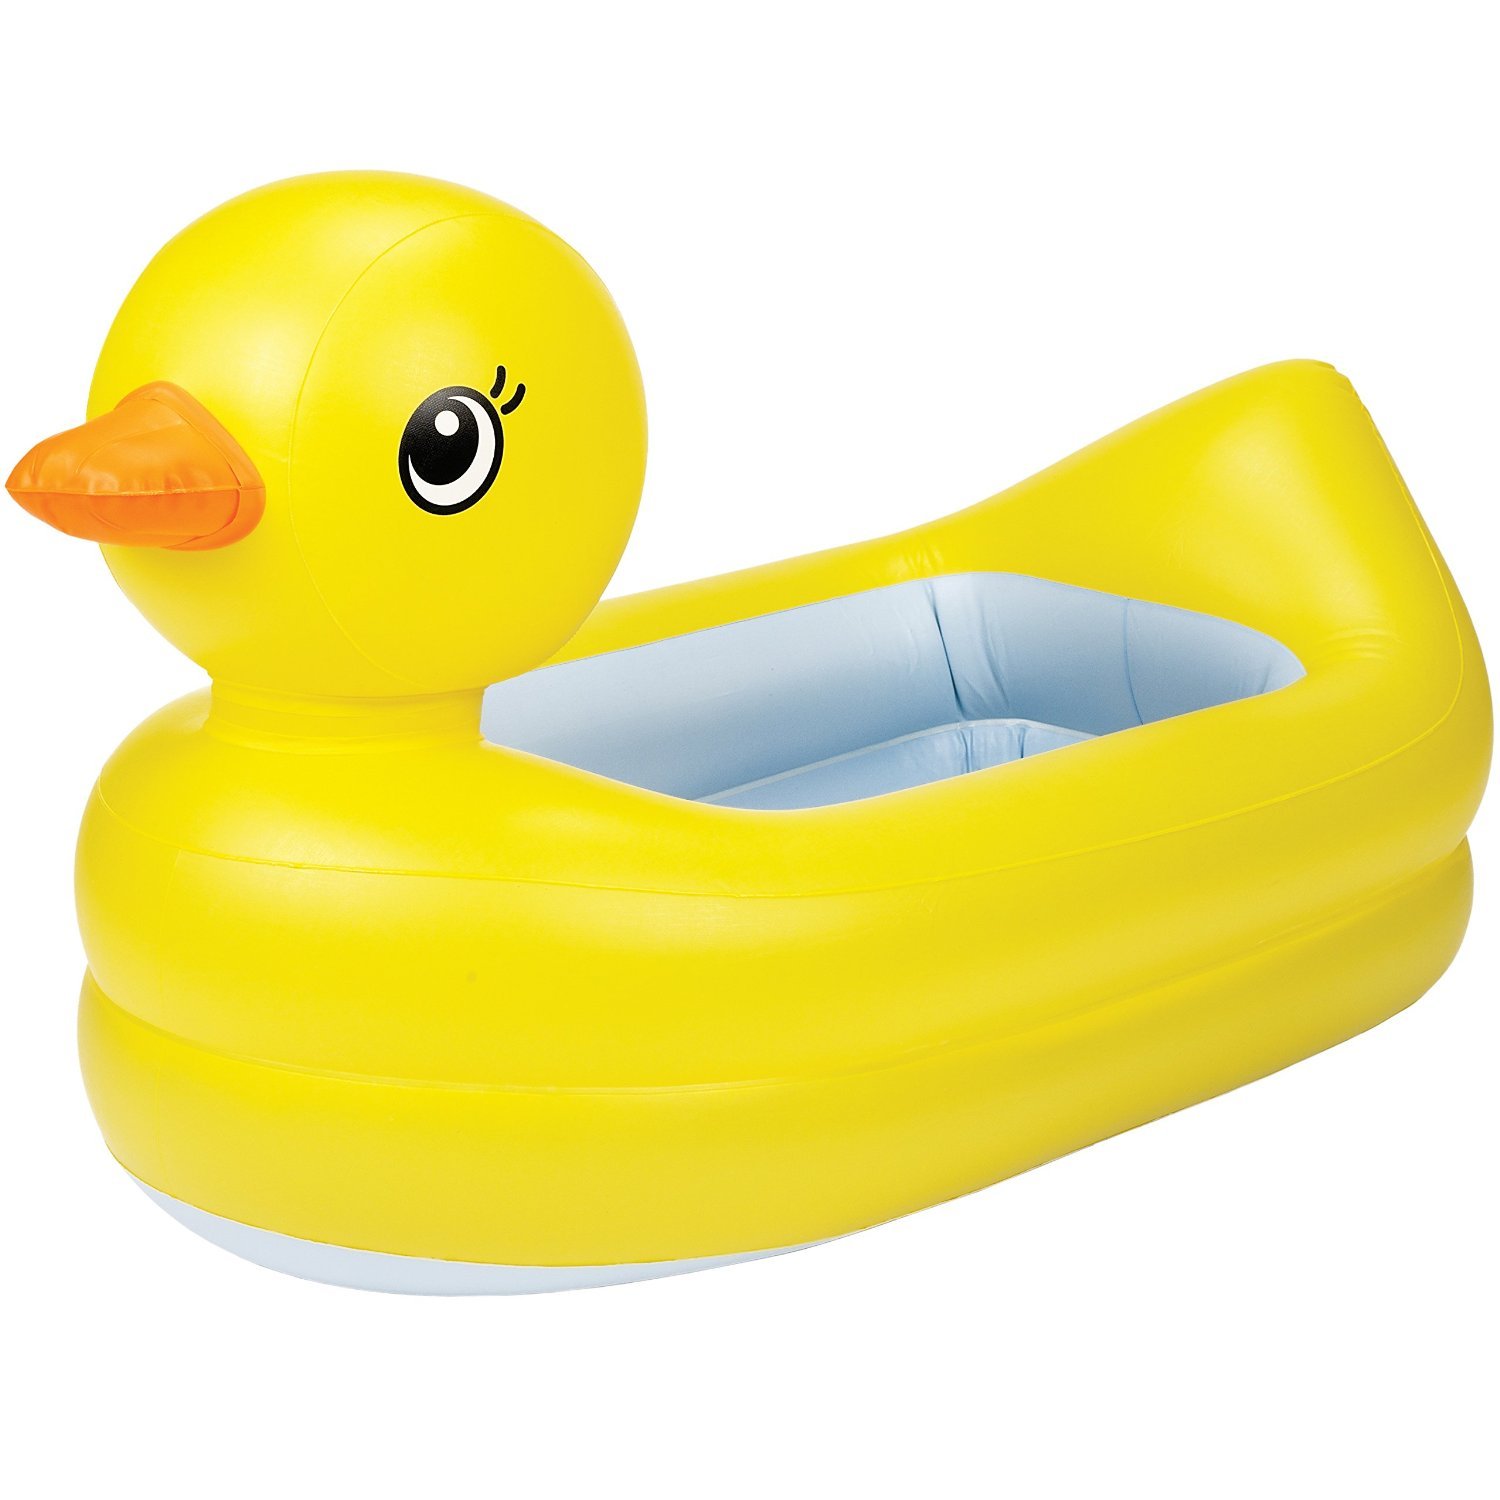 Top 7 Best Infant Tubs For Newborn Reviews in 2023 3